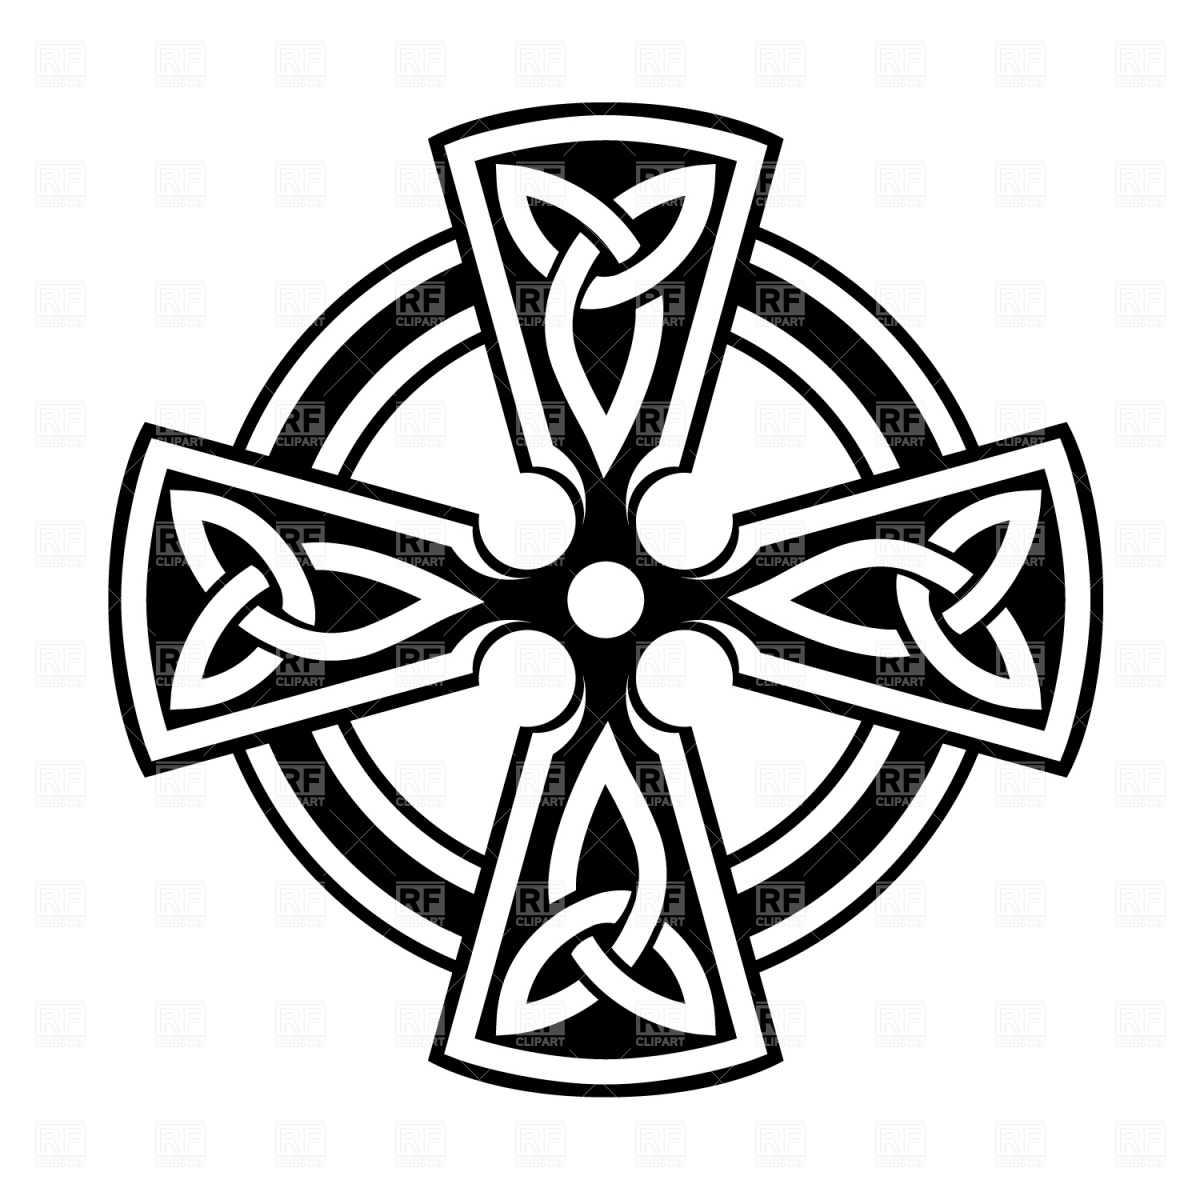 Celtic cross, 1513, Signs, Symbols, Maps, download Royalty free ...